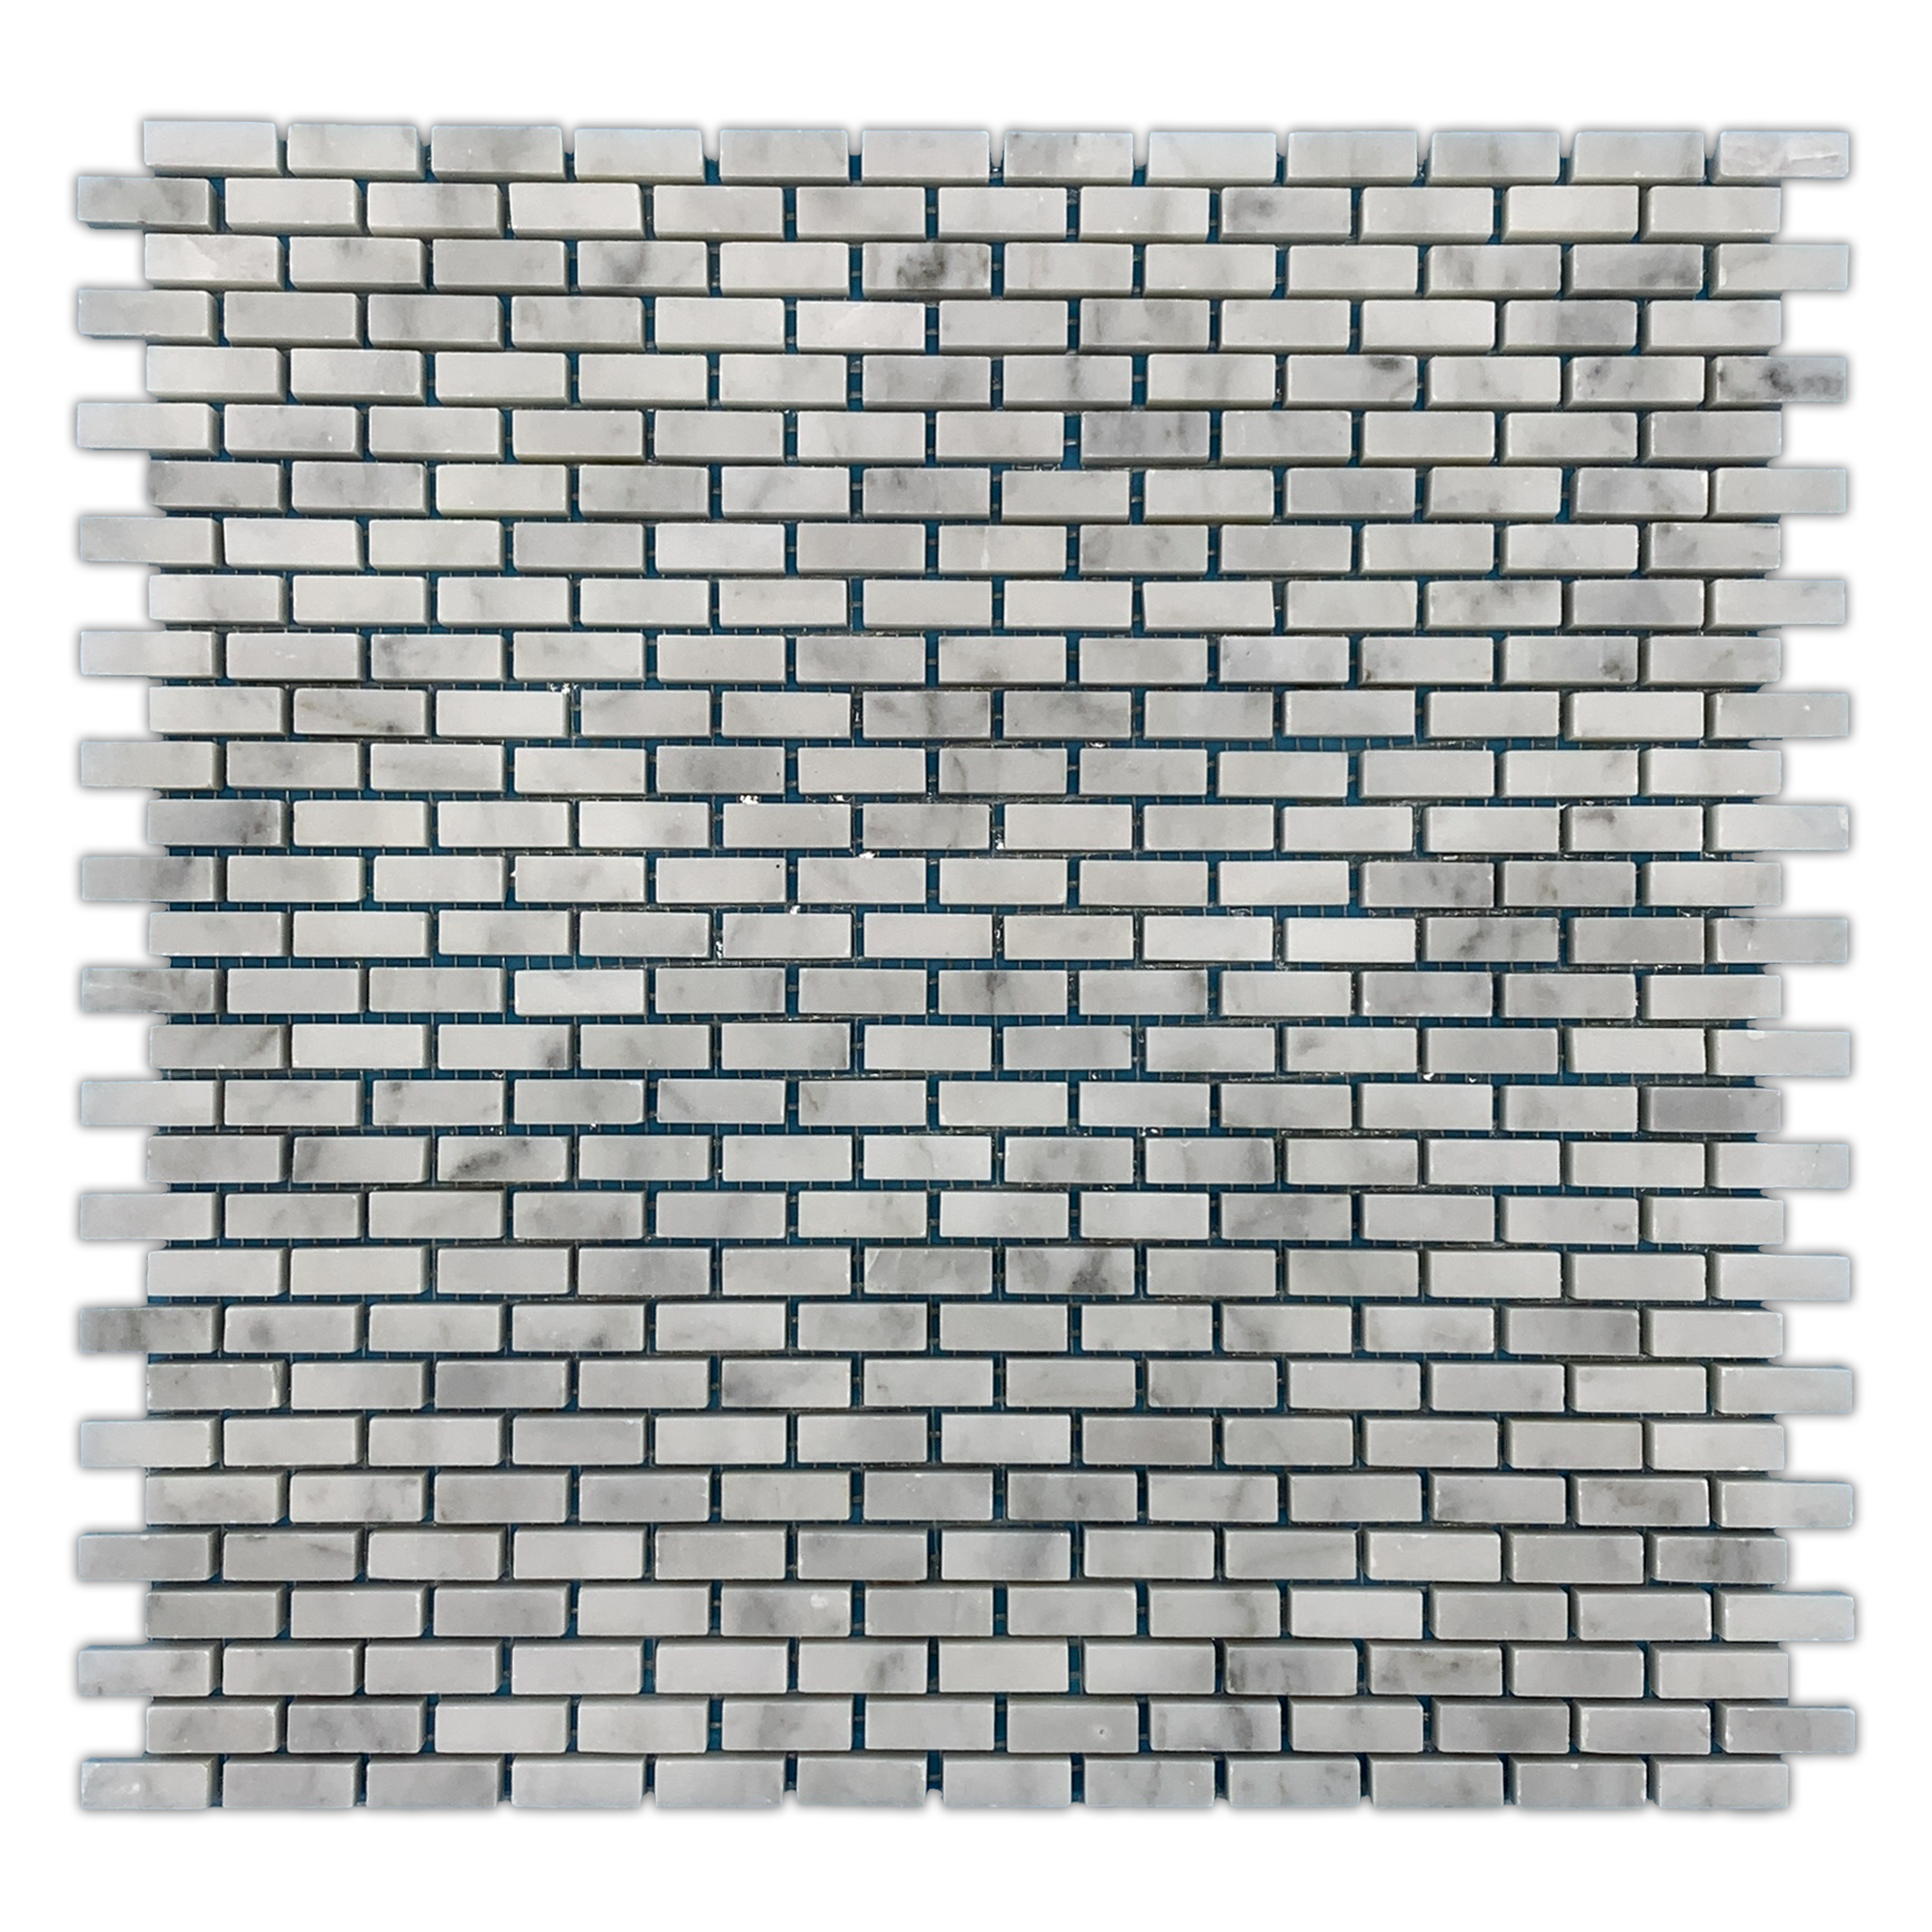 Elon Bianco Carrara Marble Staggered Joint Field Mosaic Tile 11.75x11.8125x0.375 Honed - Surface Group Online Tile Store